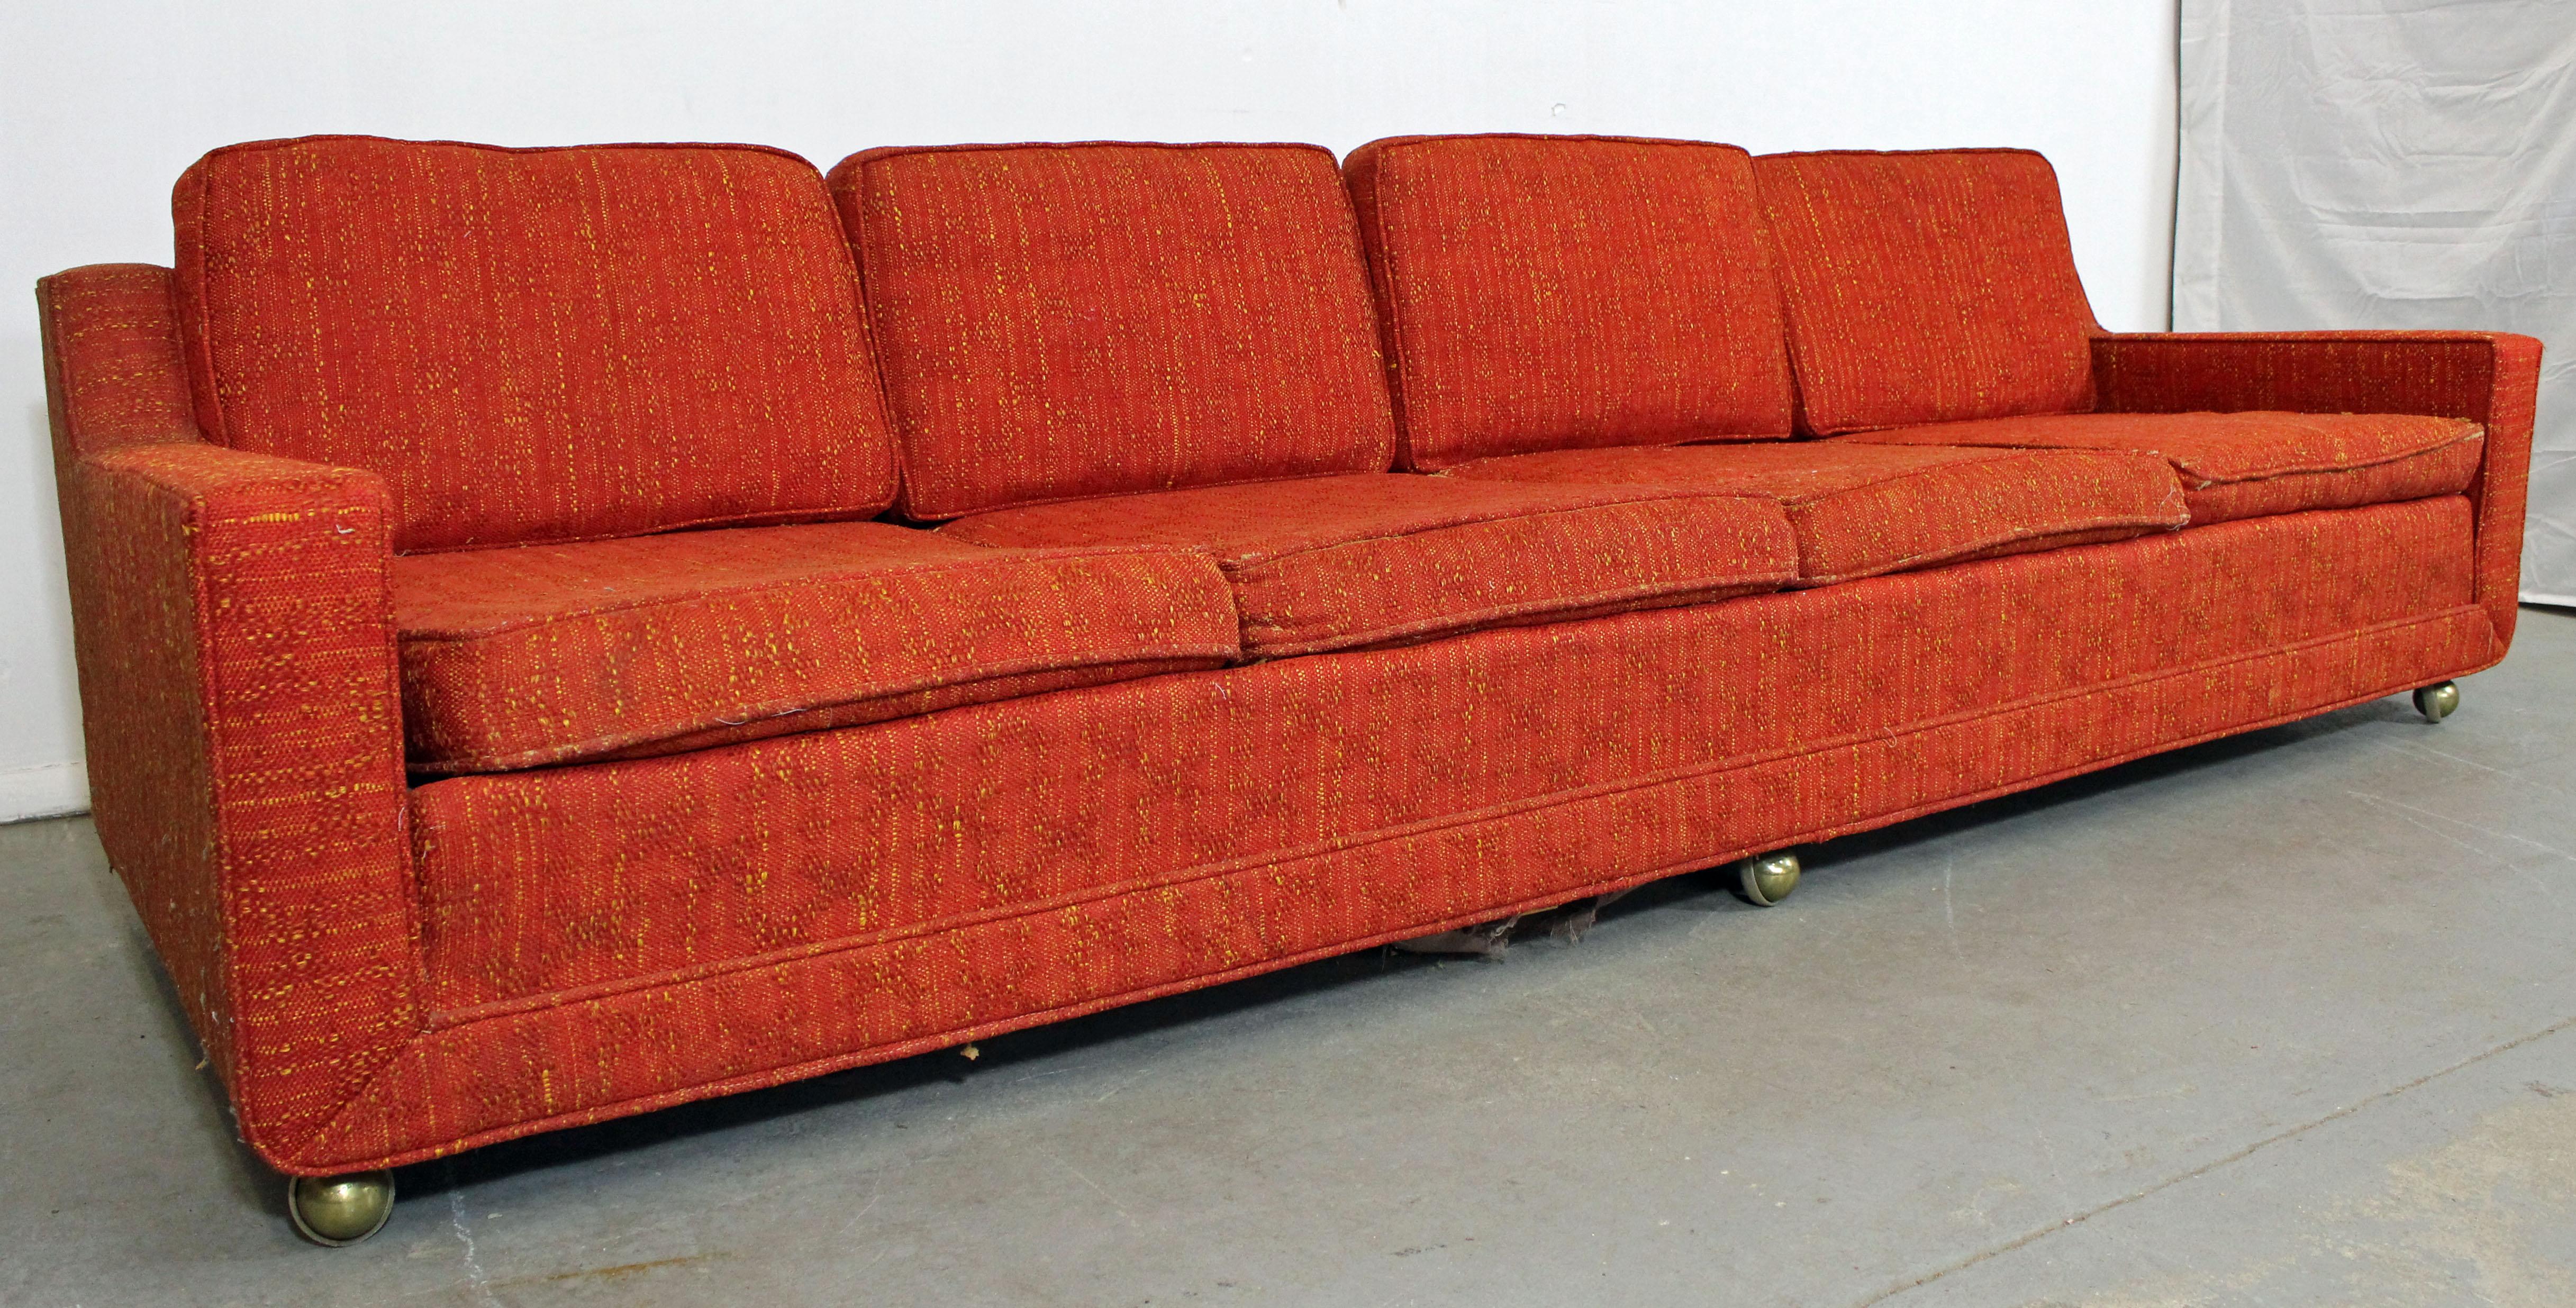 What a find. Offered is an elongated midcentury sofa with four seats by Kroehler. Features three castor wheels in front and wood legs in back, which makes for easy moving. Perfect for entertaining! It is structurally sound showing age wear. Will